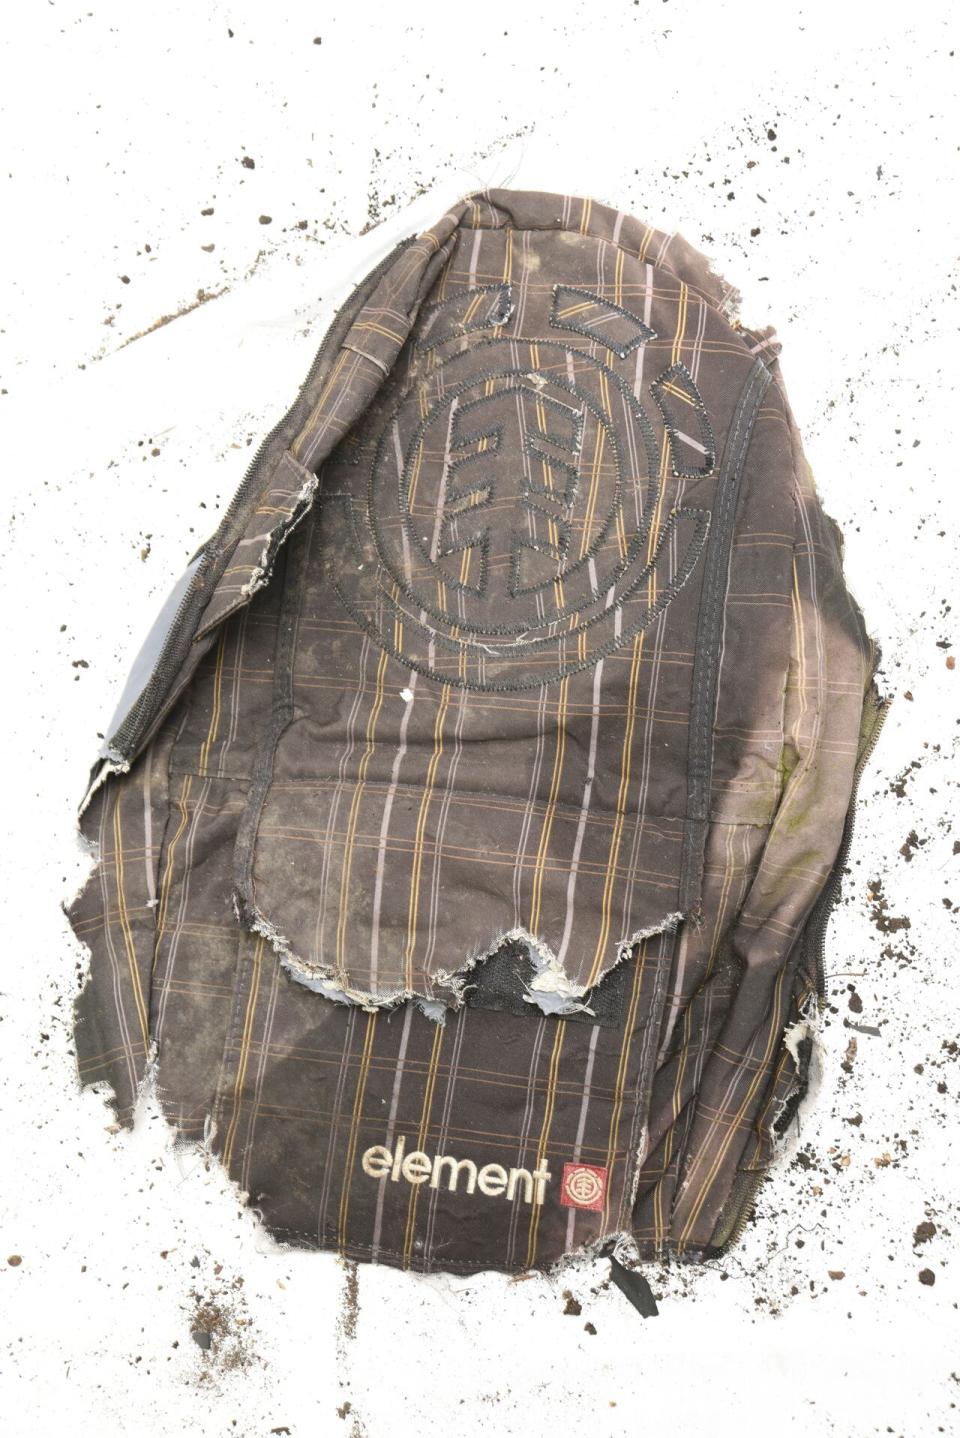 This backpack was found at the makeshift campsite where the human remains were found.